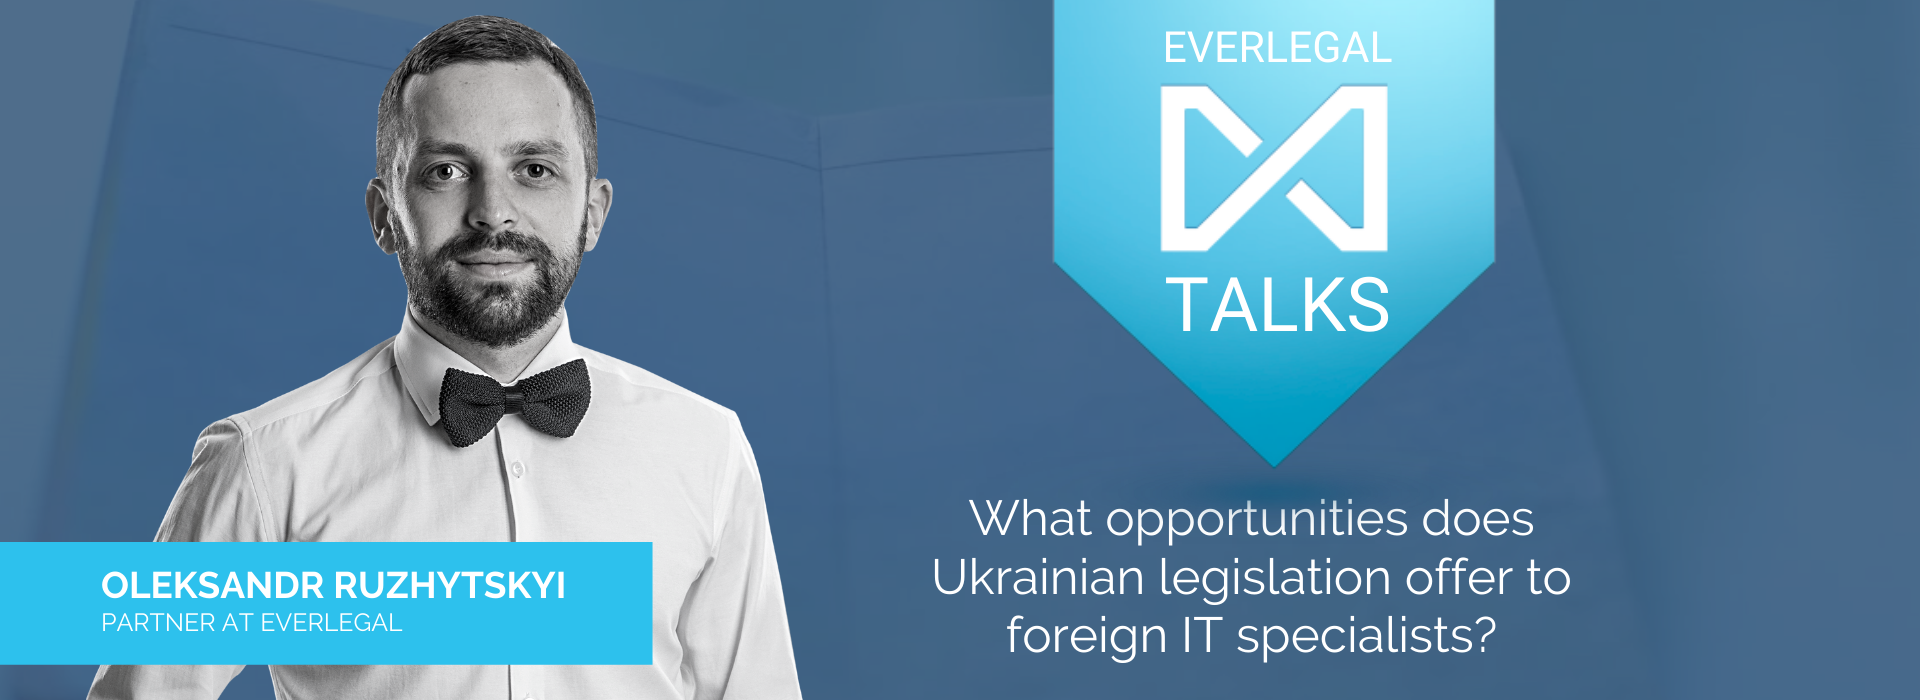 EverlegalTalks: What Opportunities Does Ukrainian Legislation Offer to Foreign IT Specialists?